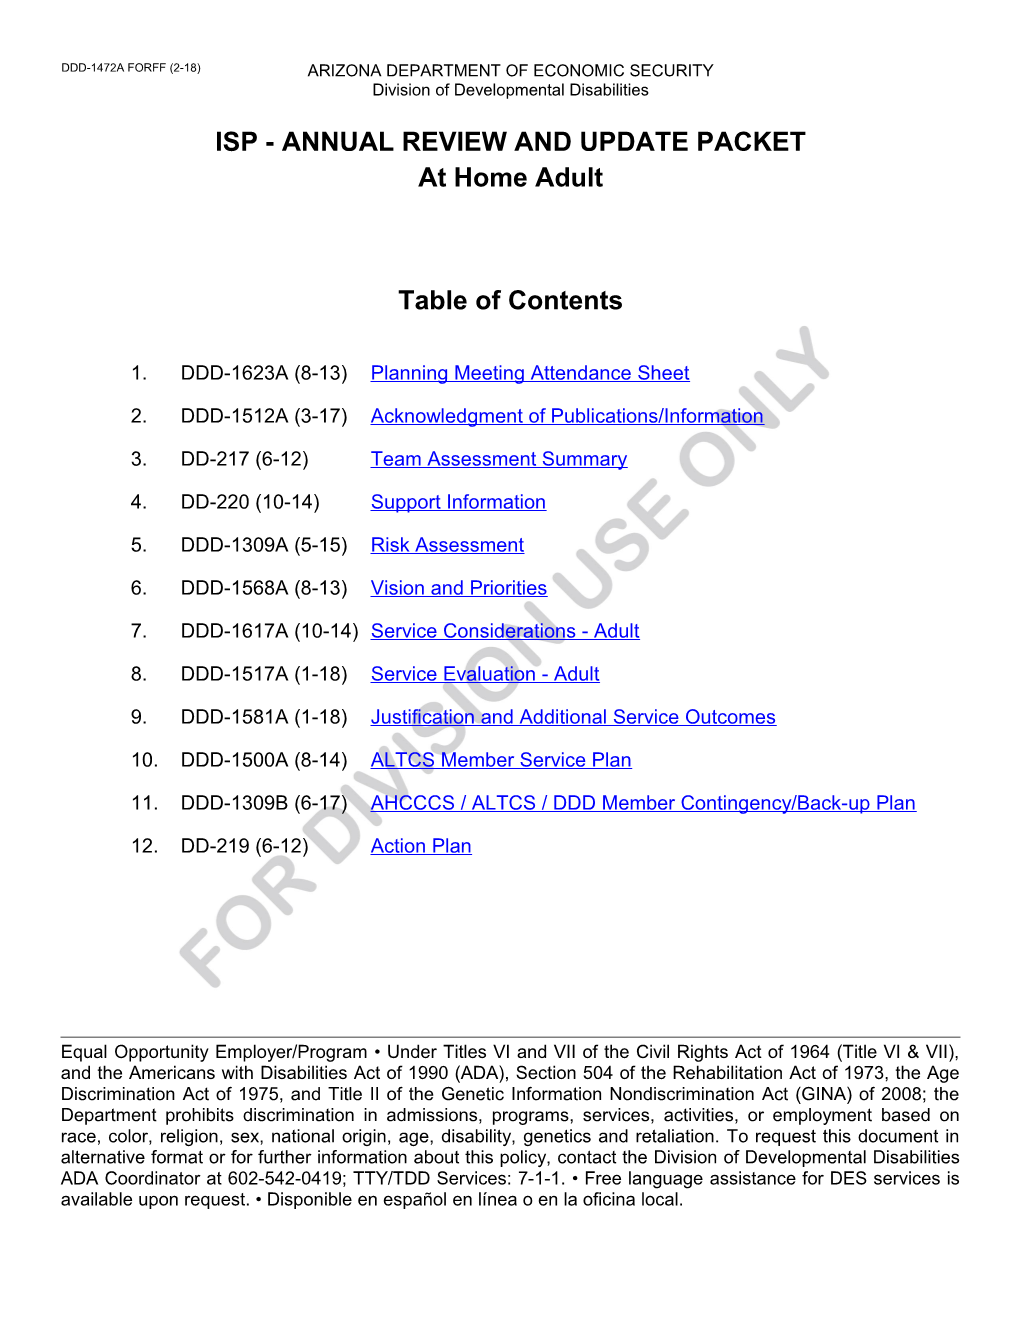 DDD-1472A - ISP - Annual Review and Update Packet (At Home Adult)